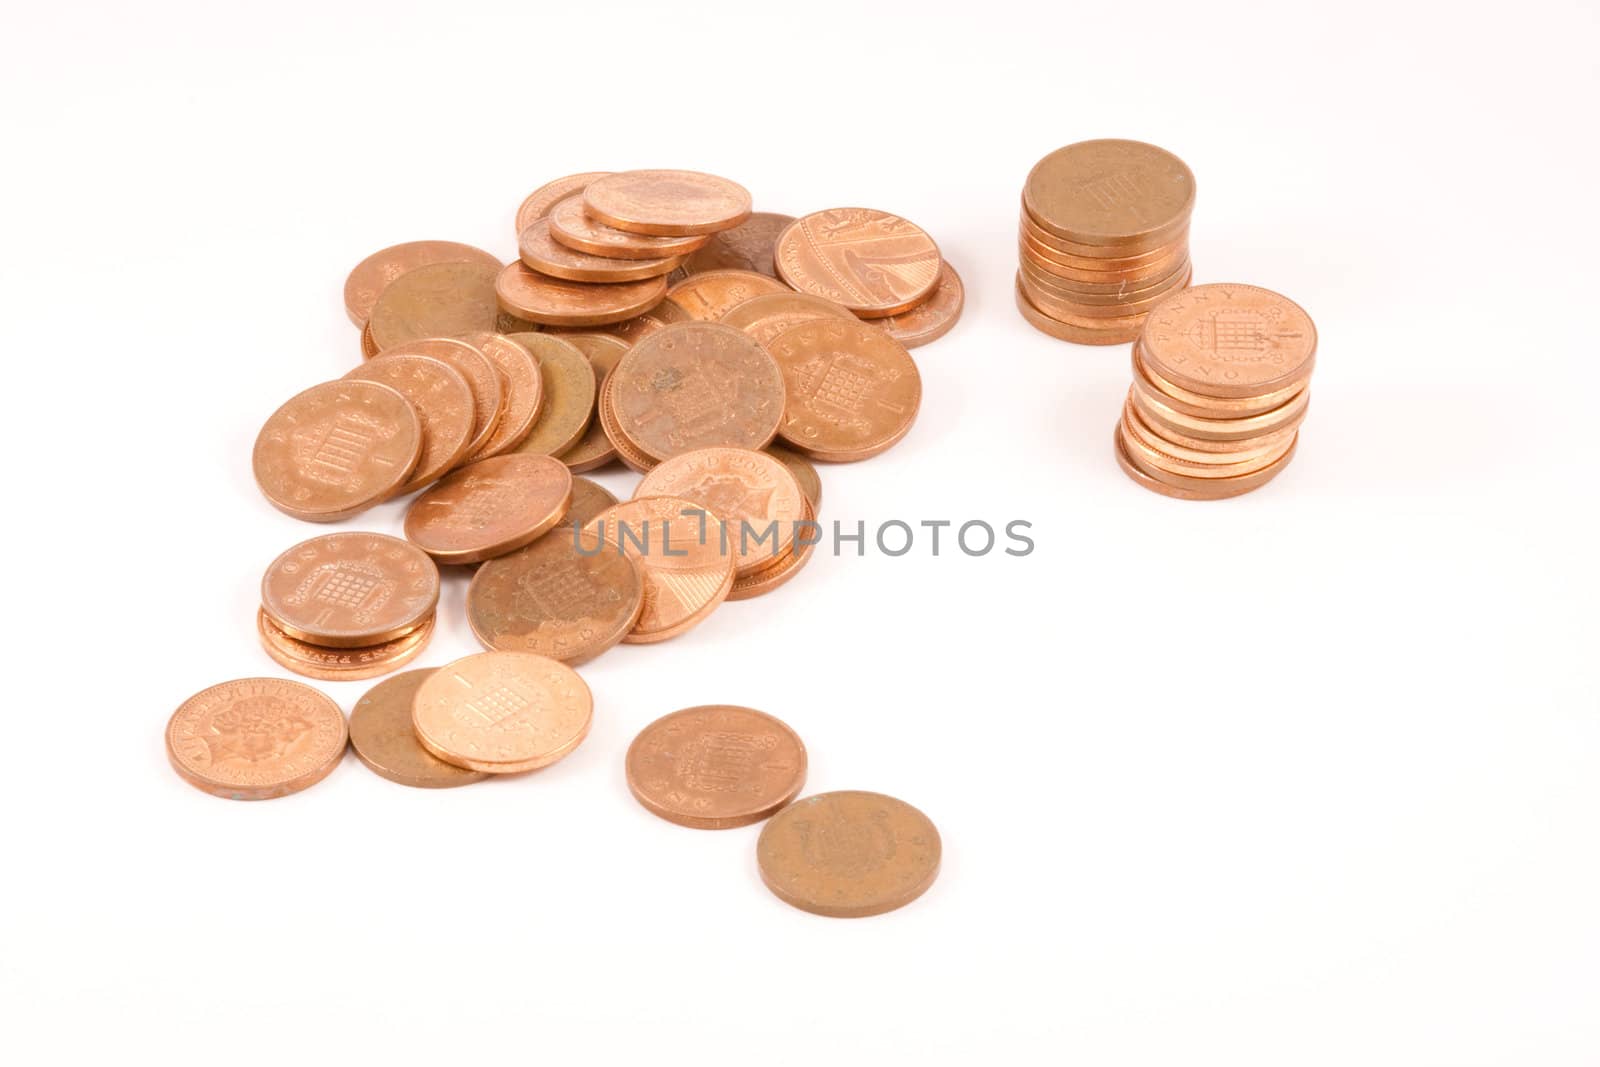 Pile of pennies and stacks of pennies.